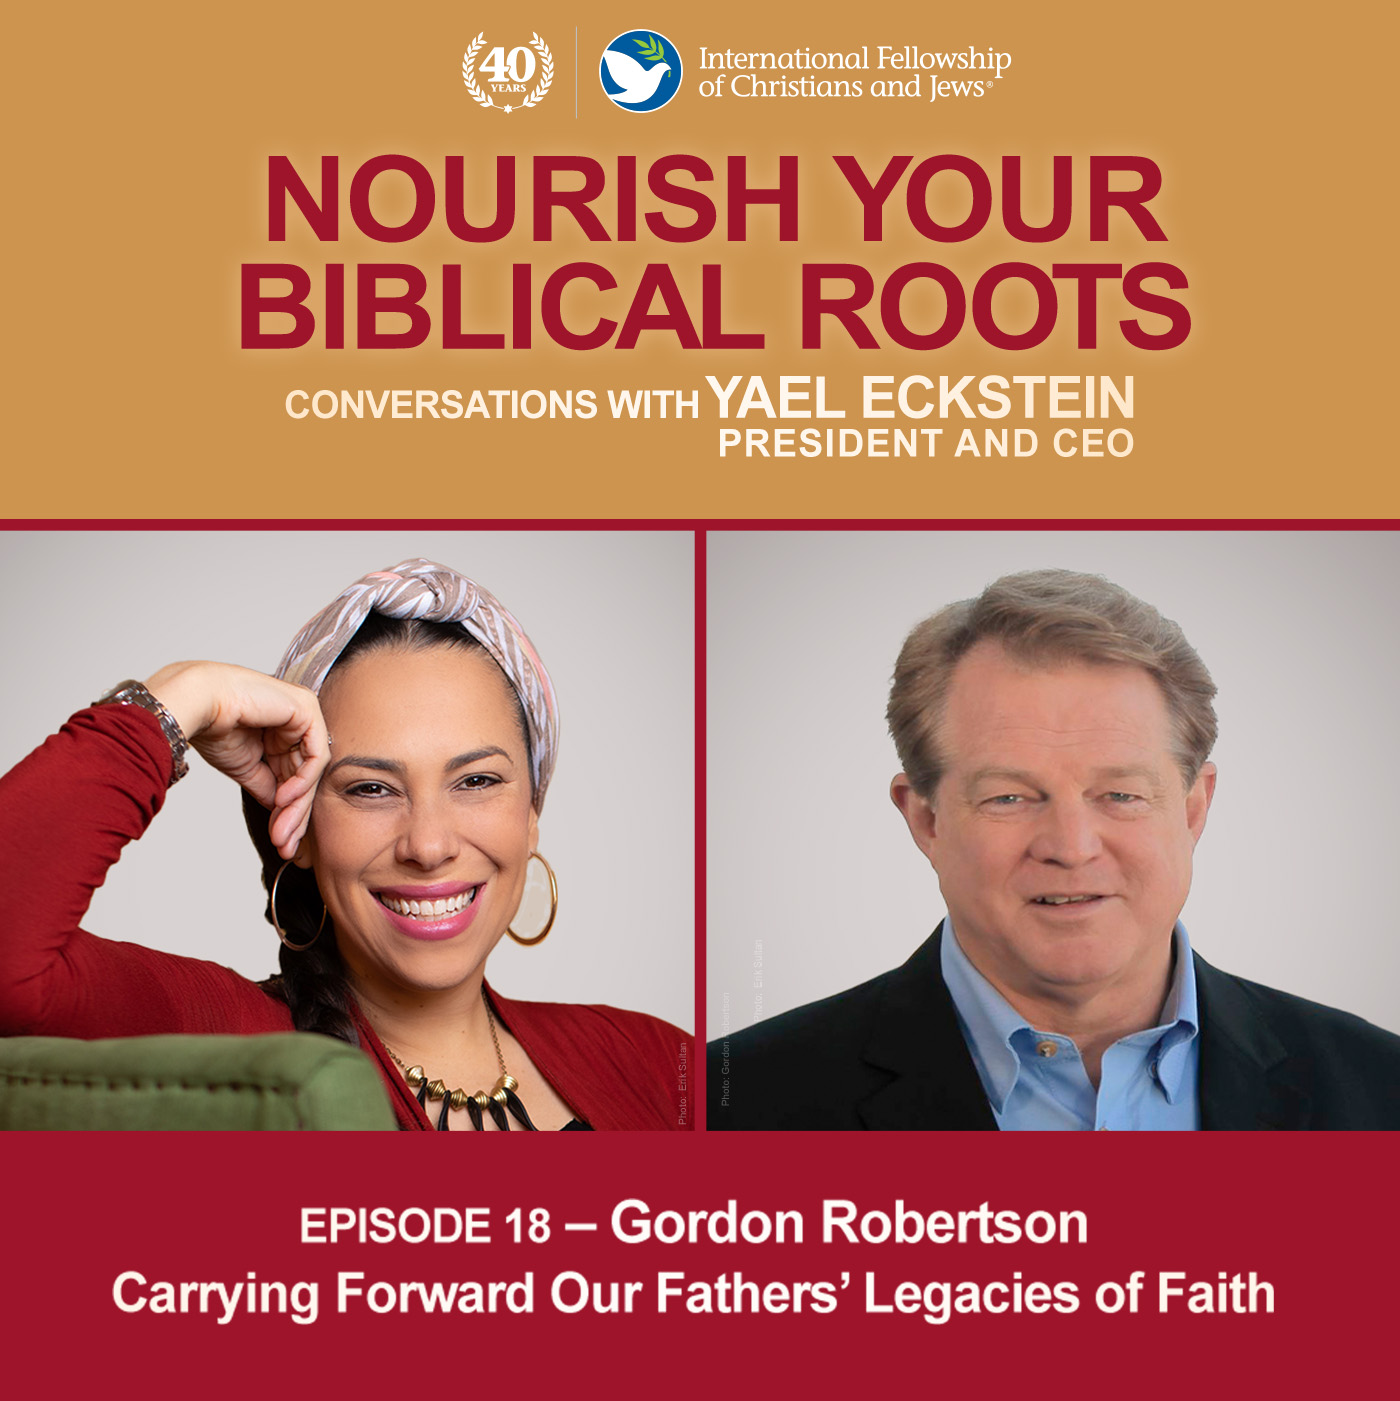 Conversations with Yael Eckstein: Gordon Robertson - Carrying On Our Fathers' Legacies of Faith